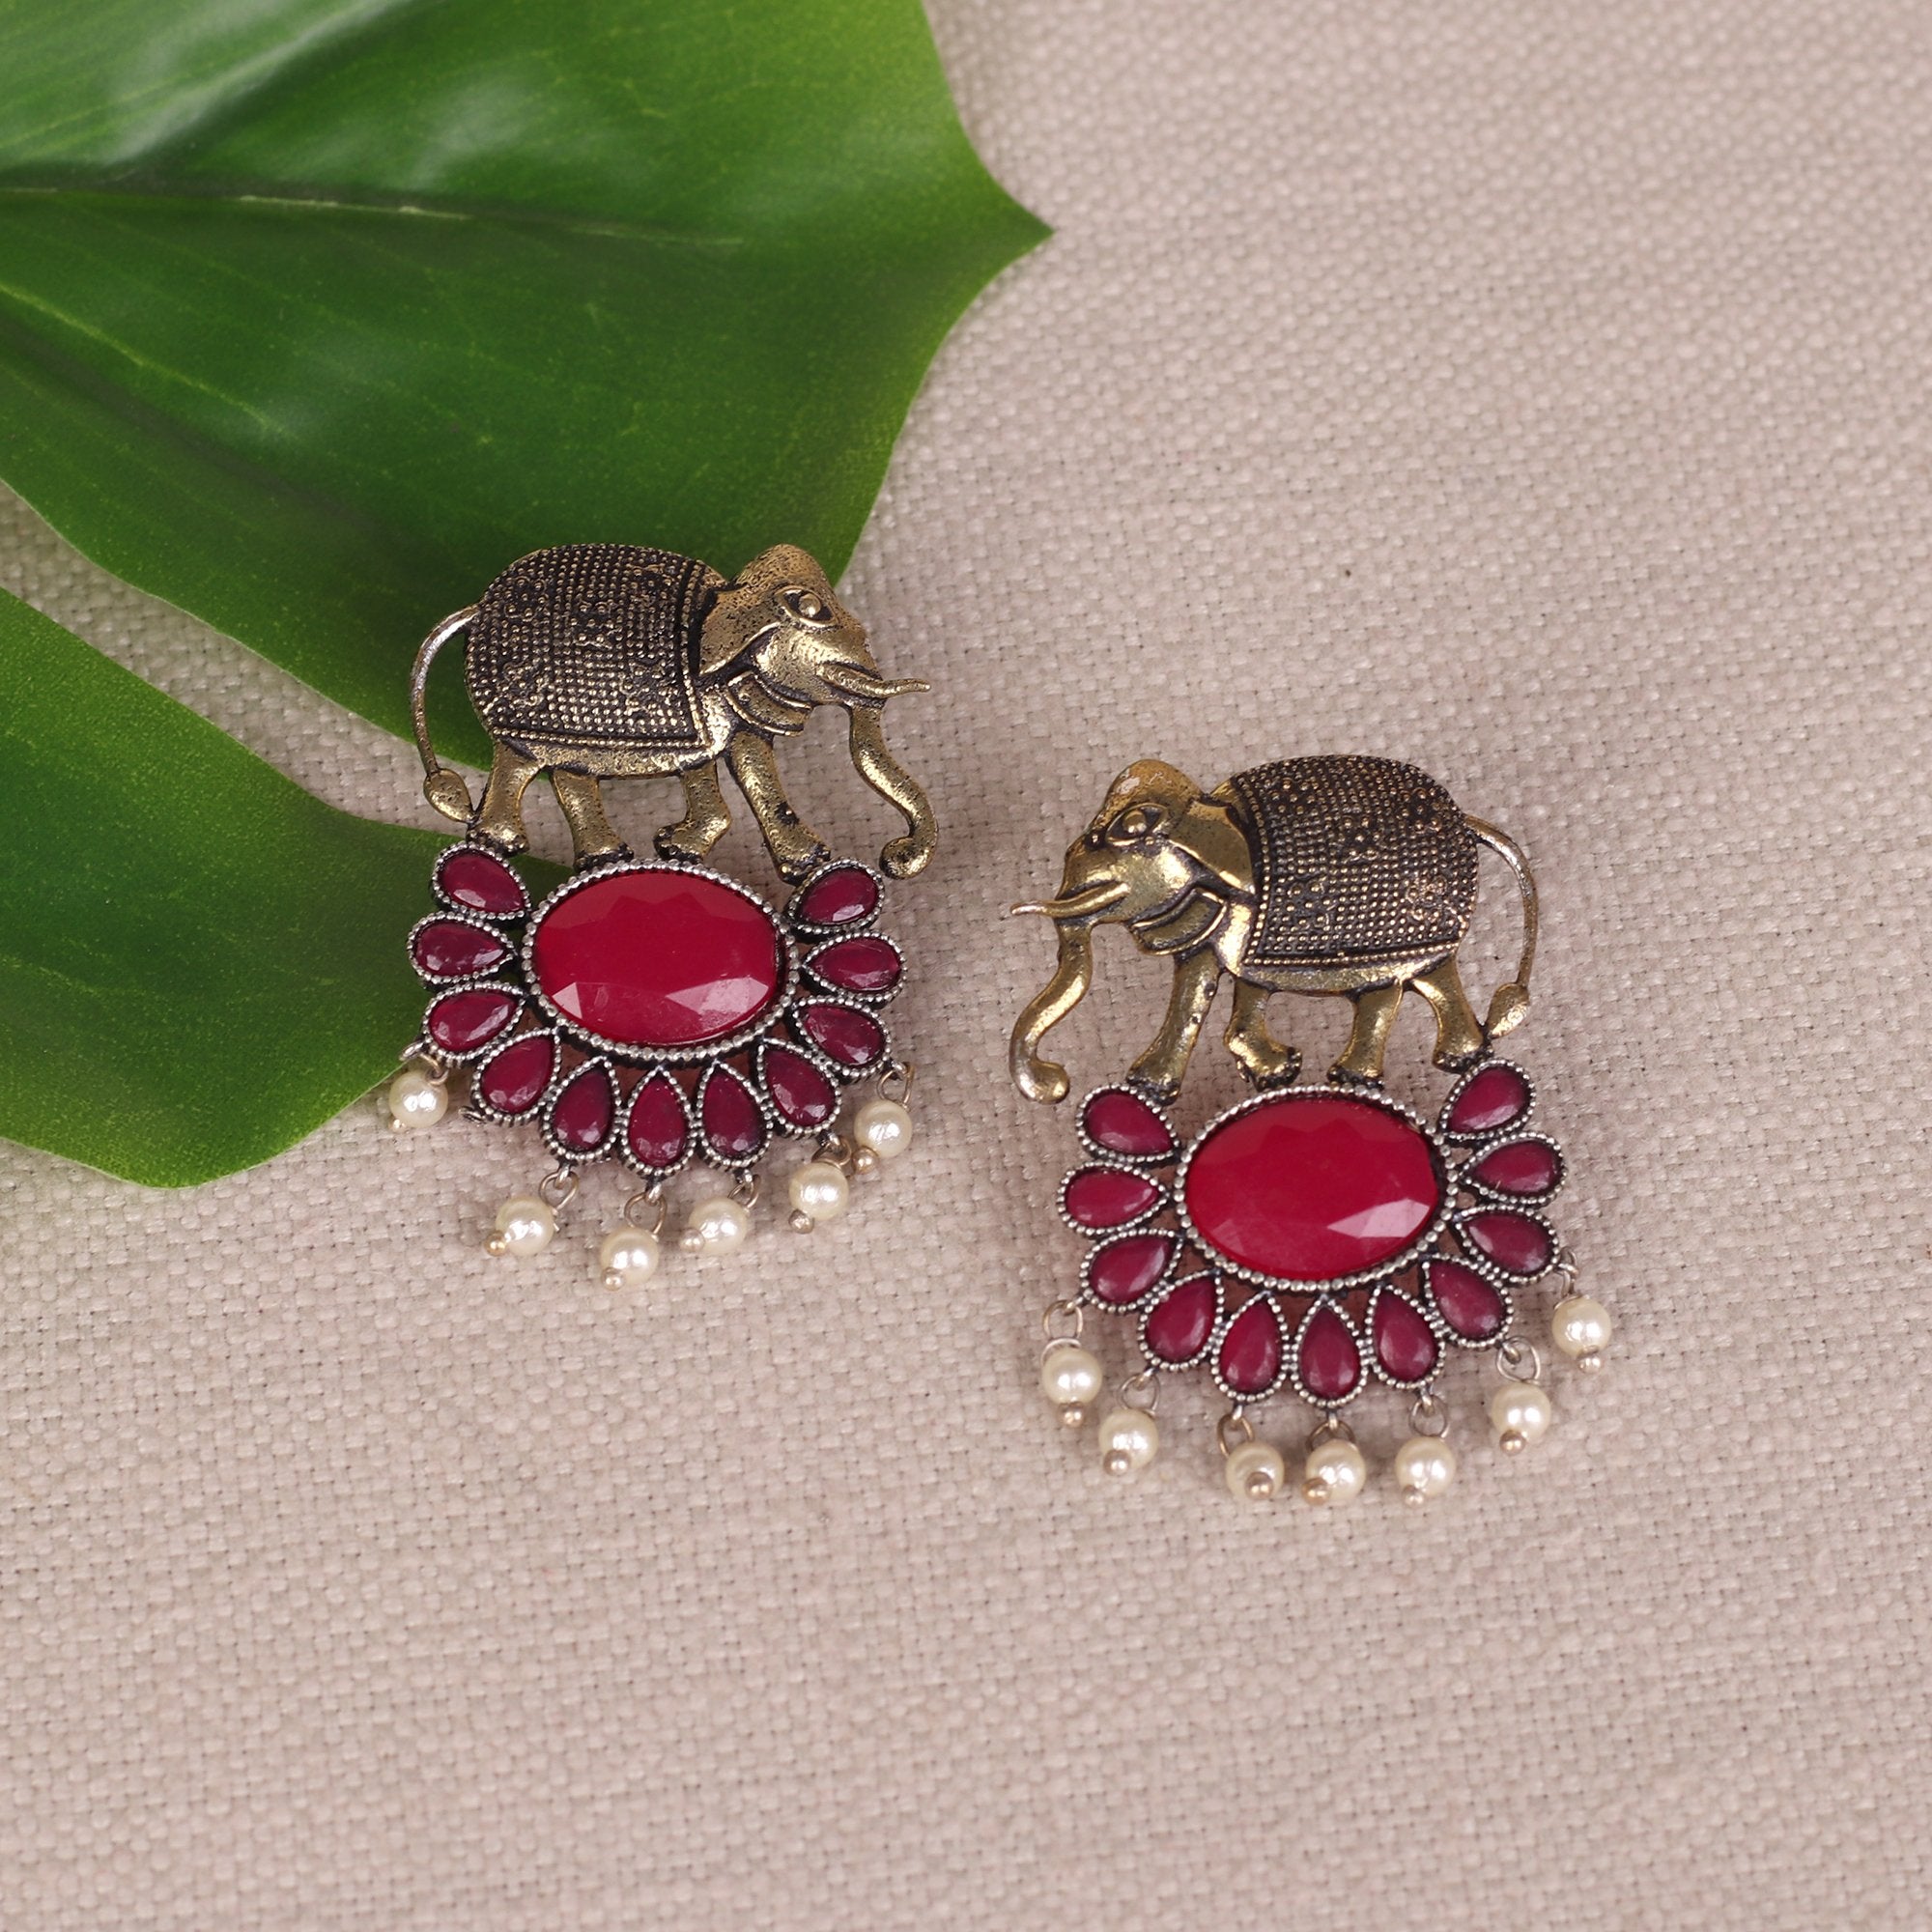 Women's Elephant Motif Earings With Red Stones - InWeave